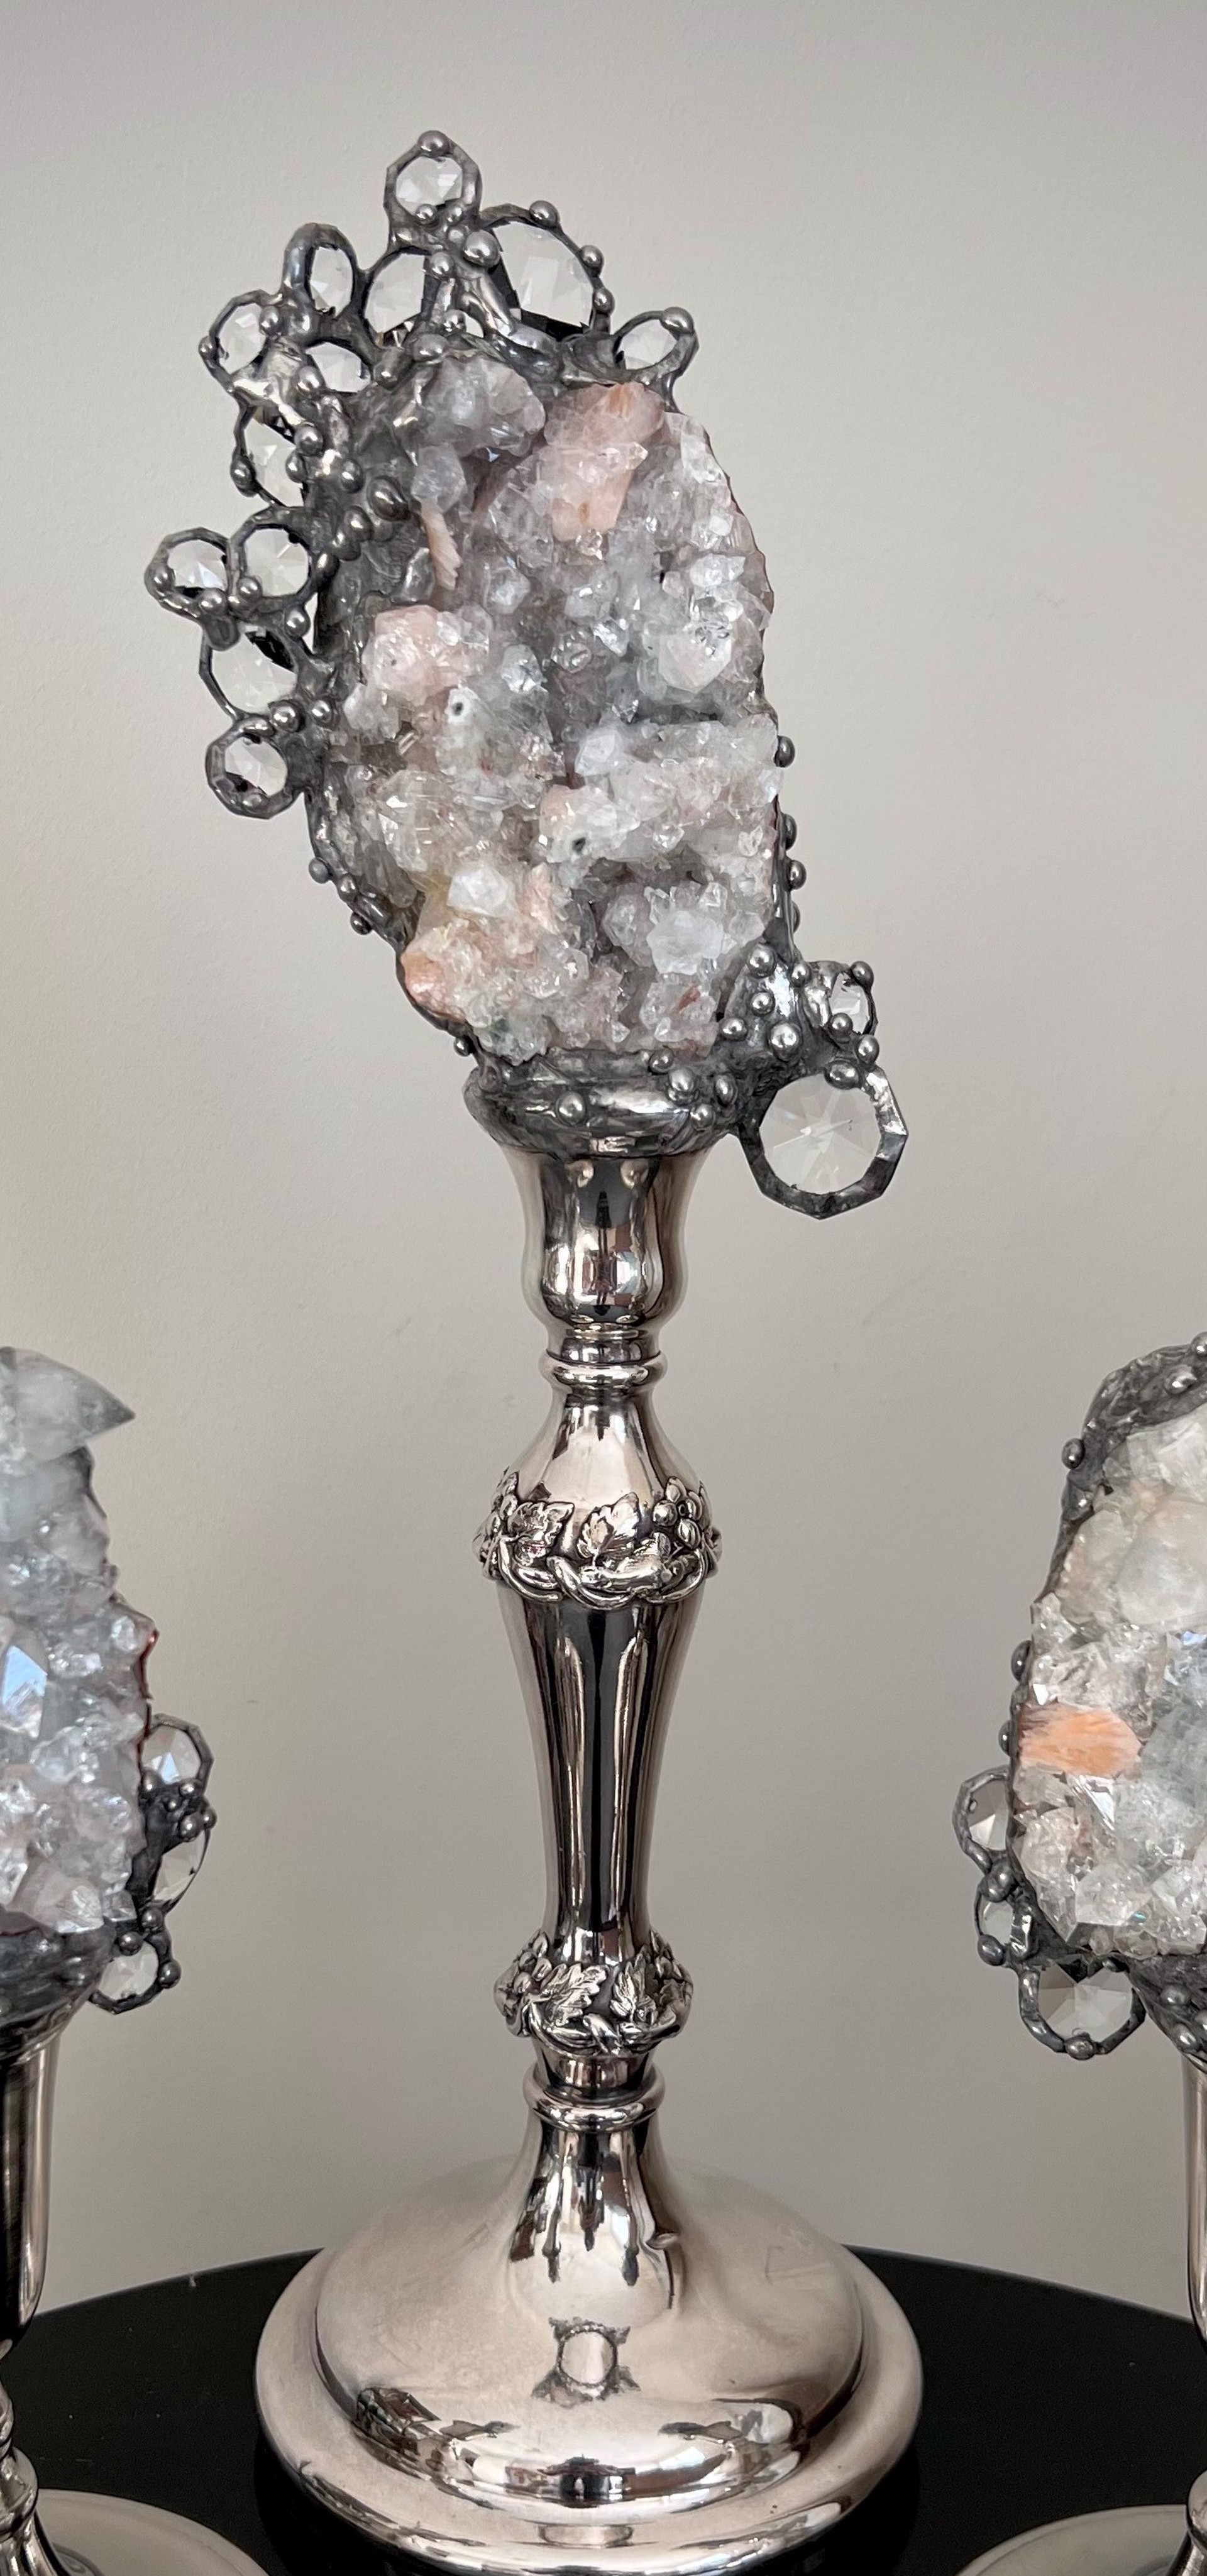 Apophyllite on Sterling Candlestick by Trinka 5 Designs